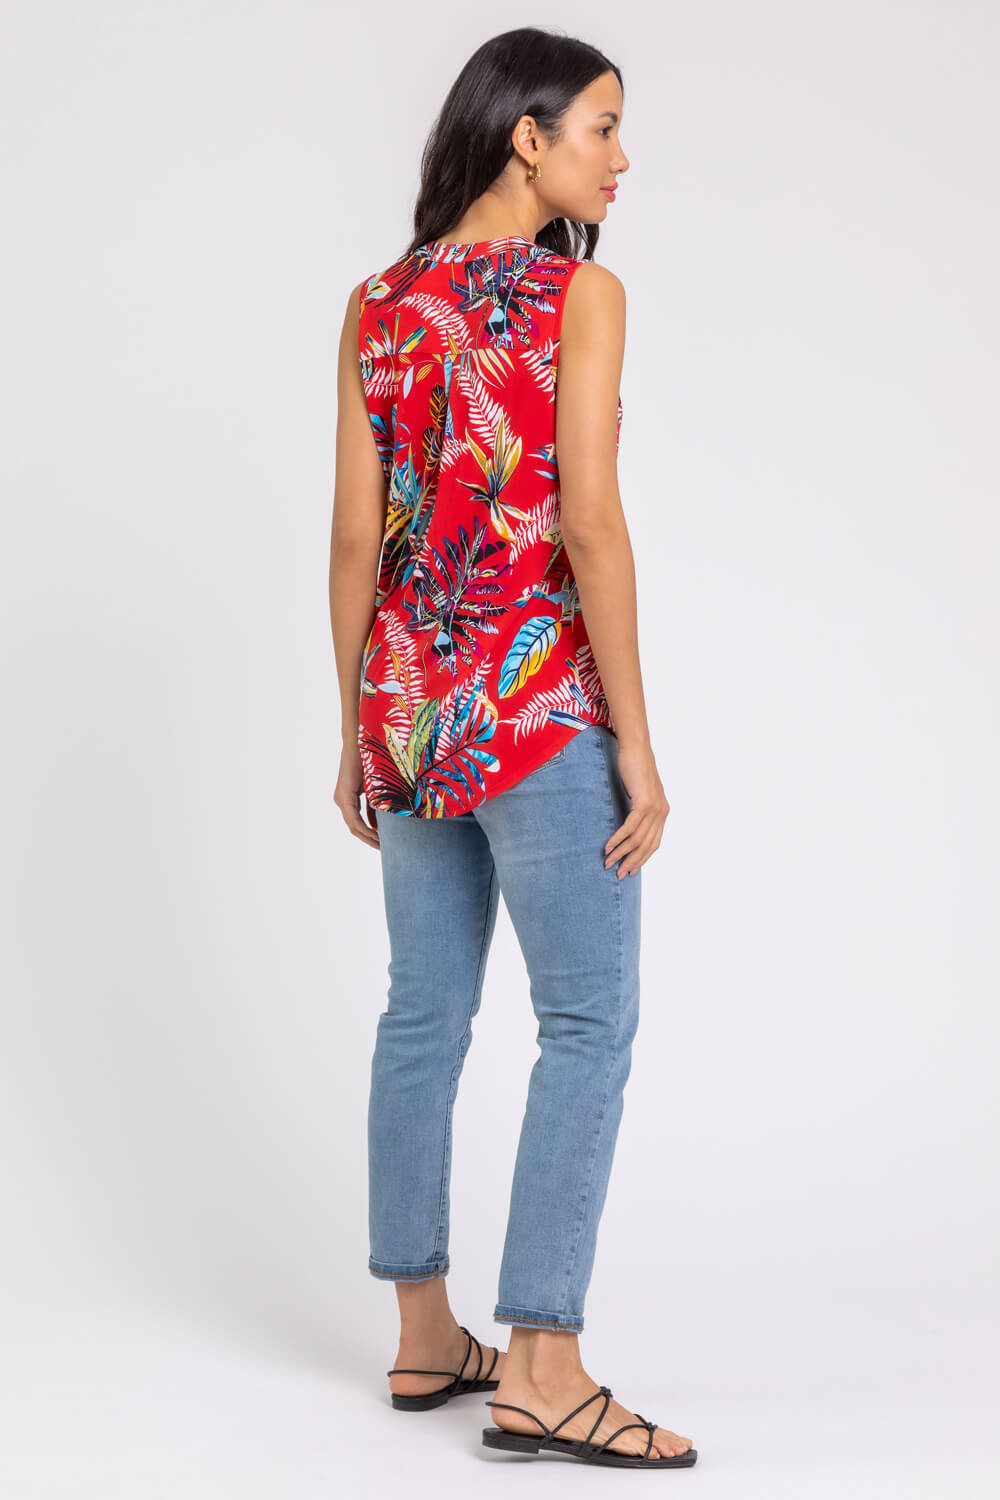 Red Tropical Print Stretch Jersey Top, Image 3 of 5